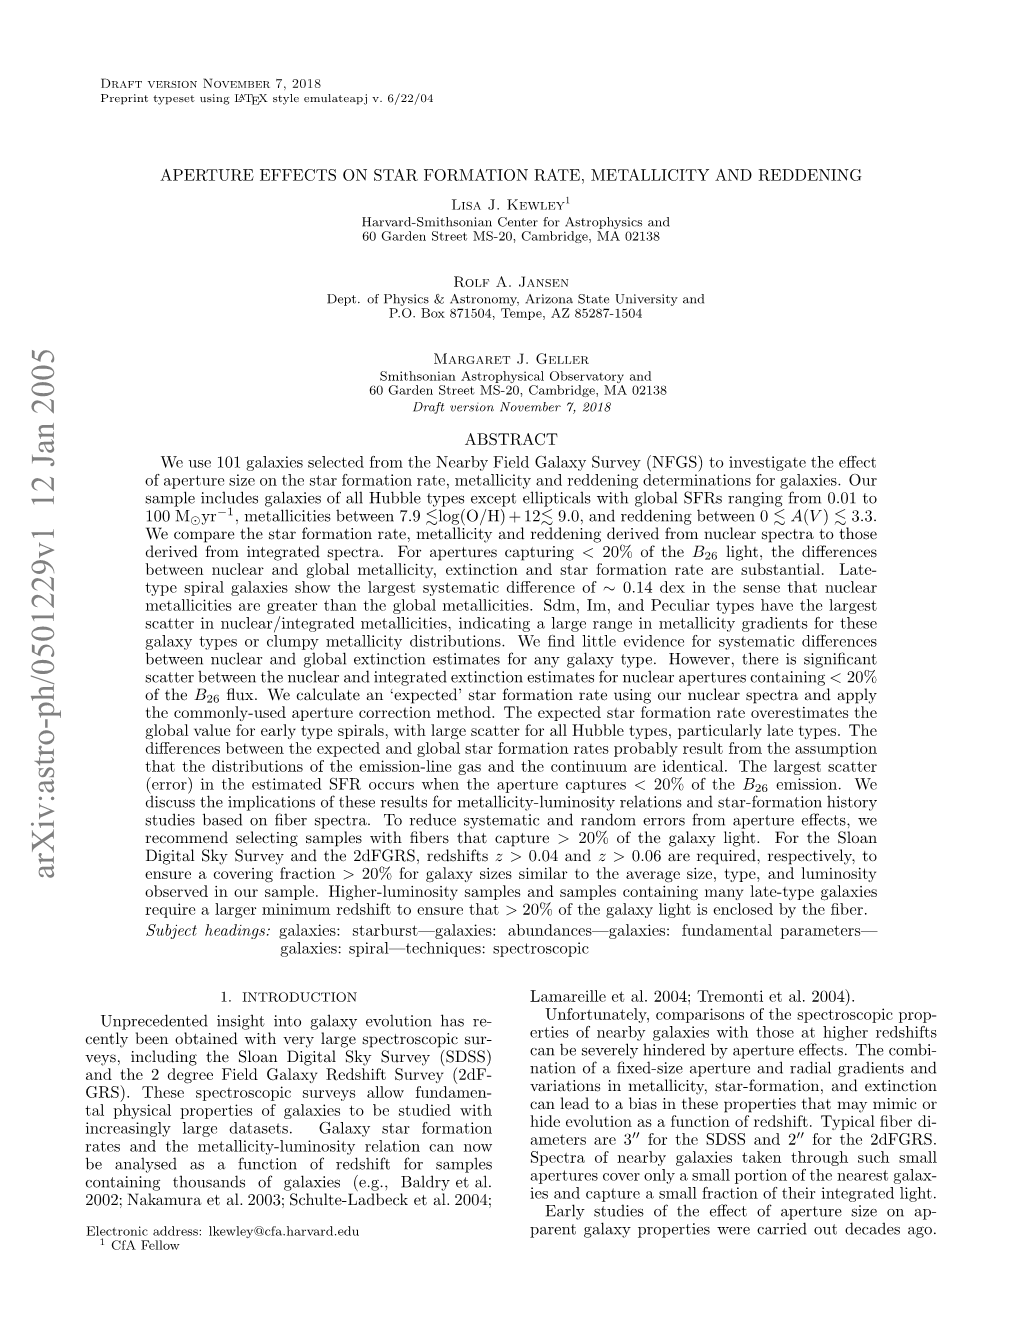 Aperture Effects on Star Formation Rate, Metallicity and Reddening